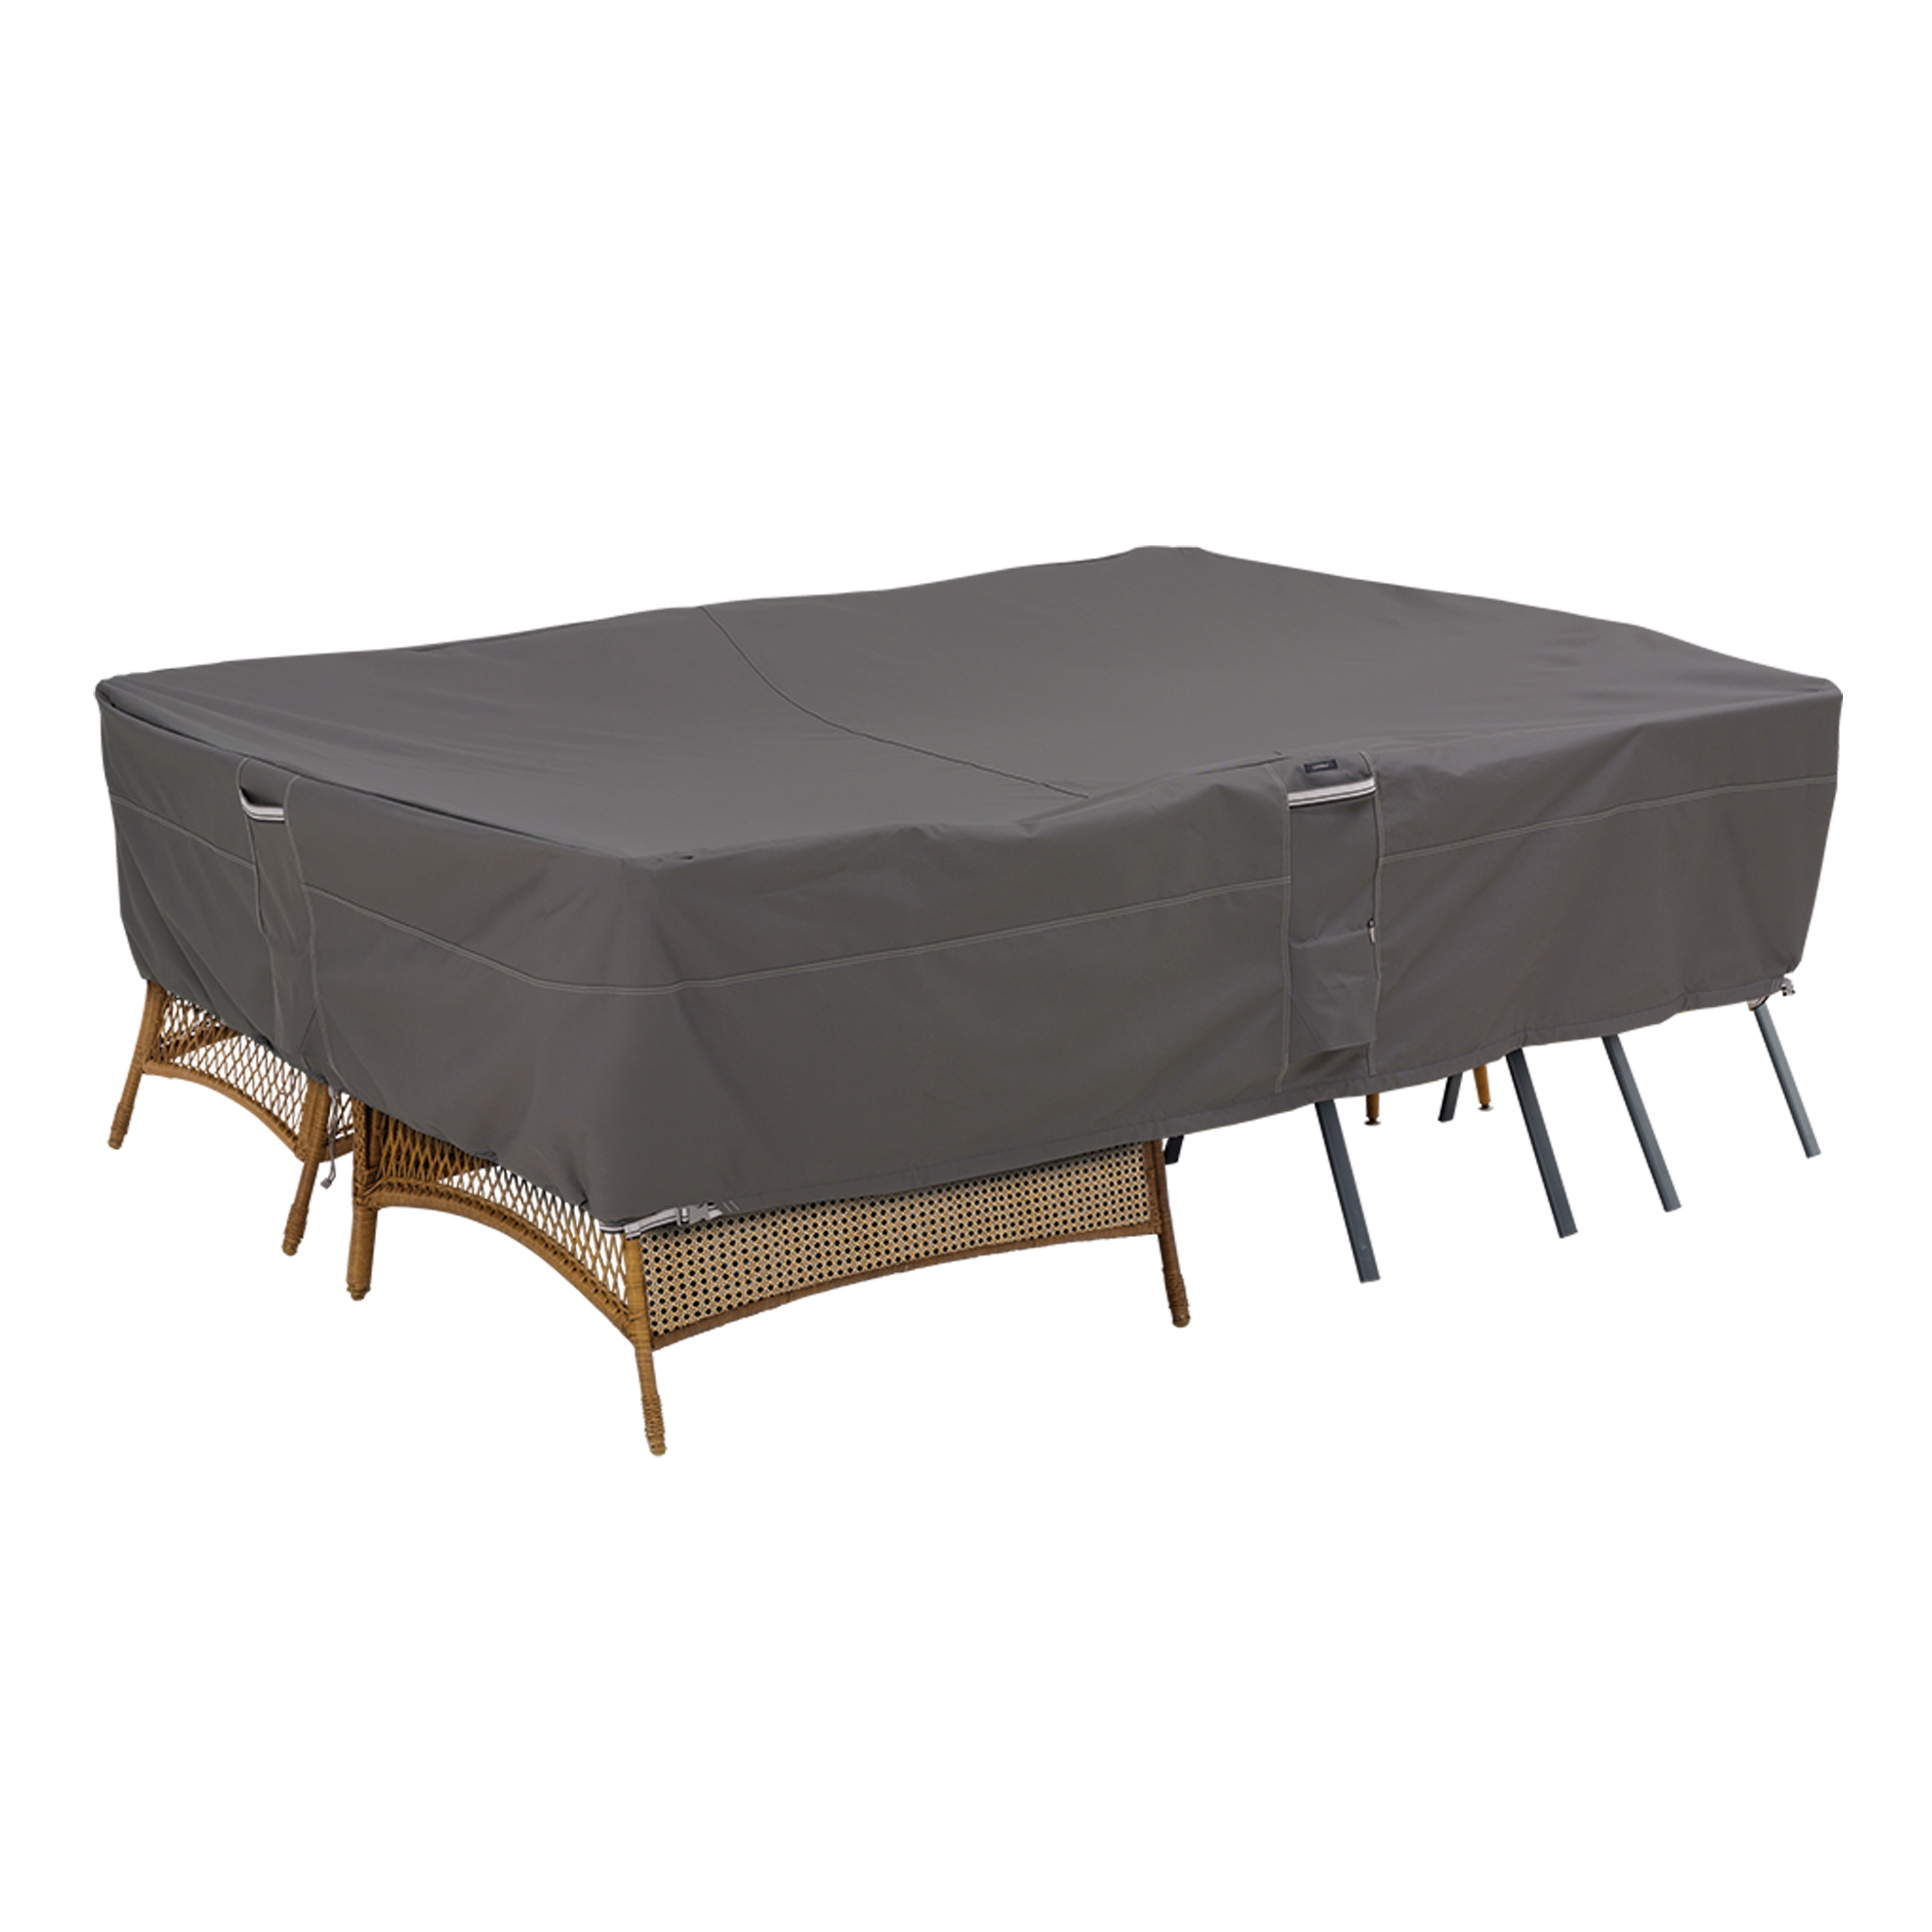 Classic Accessories Patio Furniture Cover With Durable and Water Resistant Fabric, X-Large